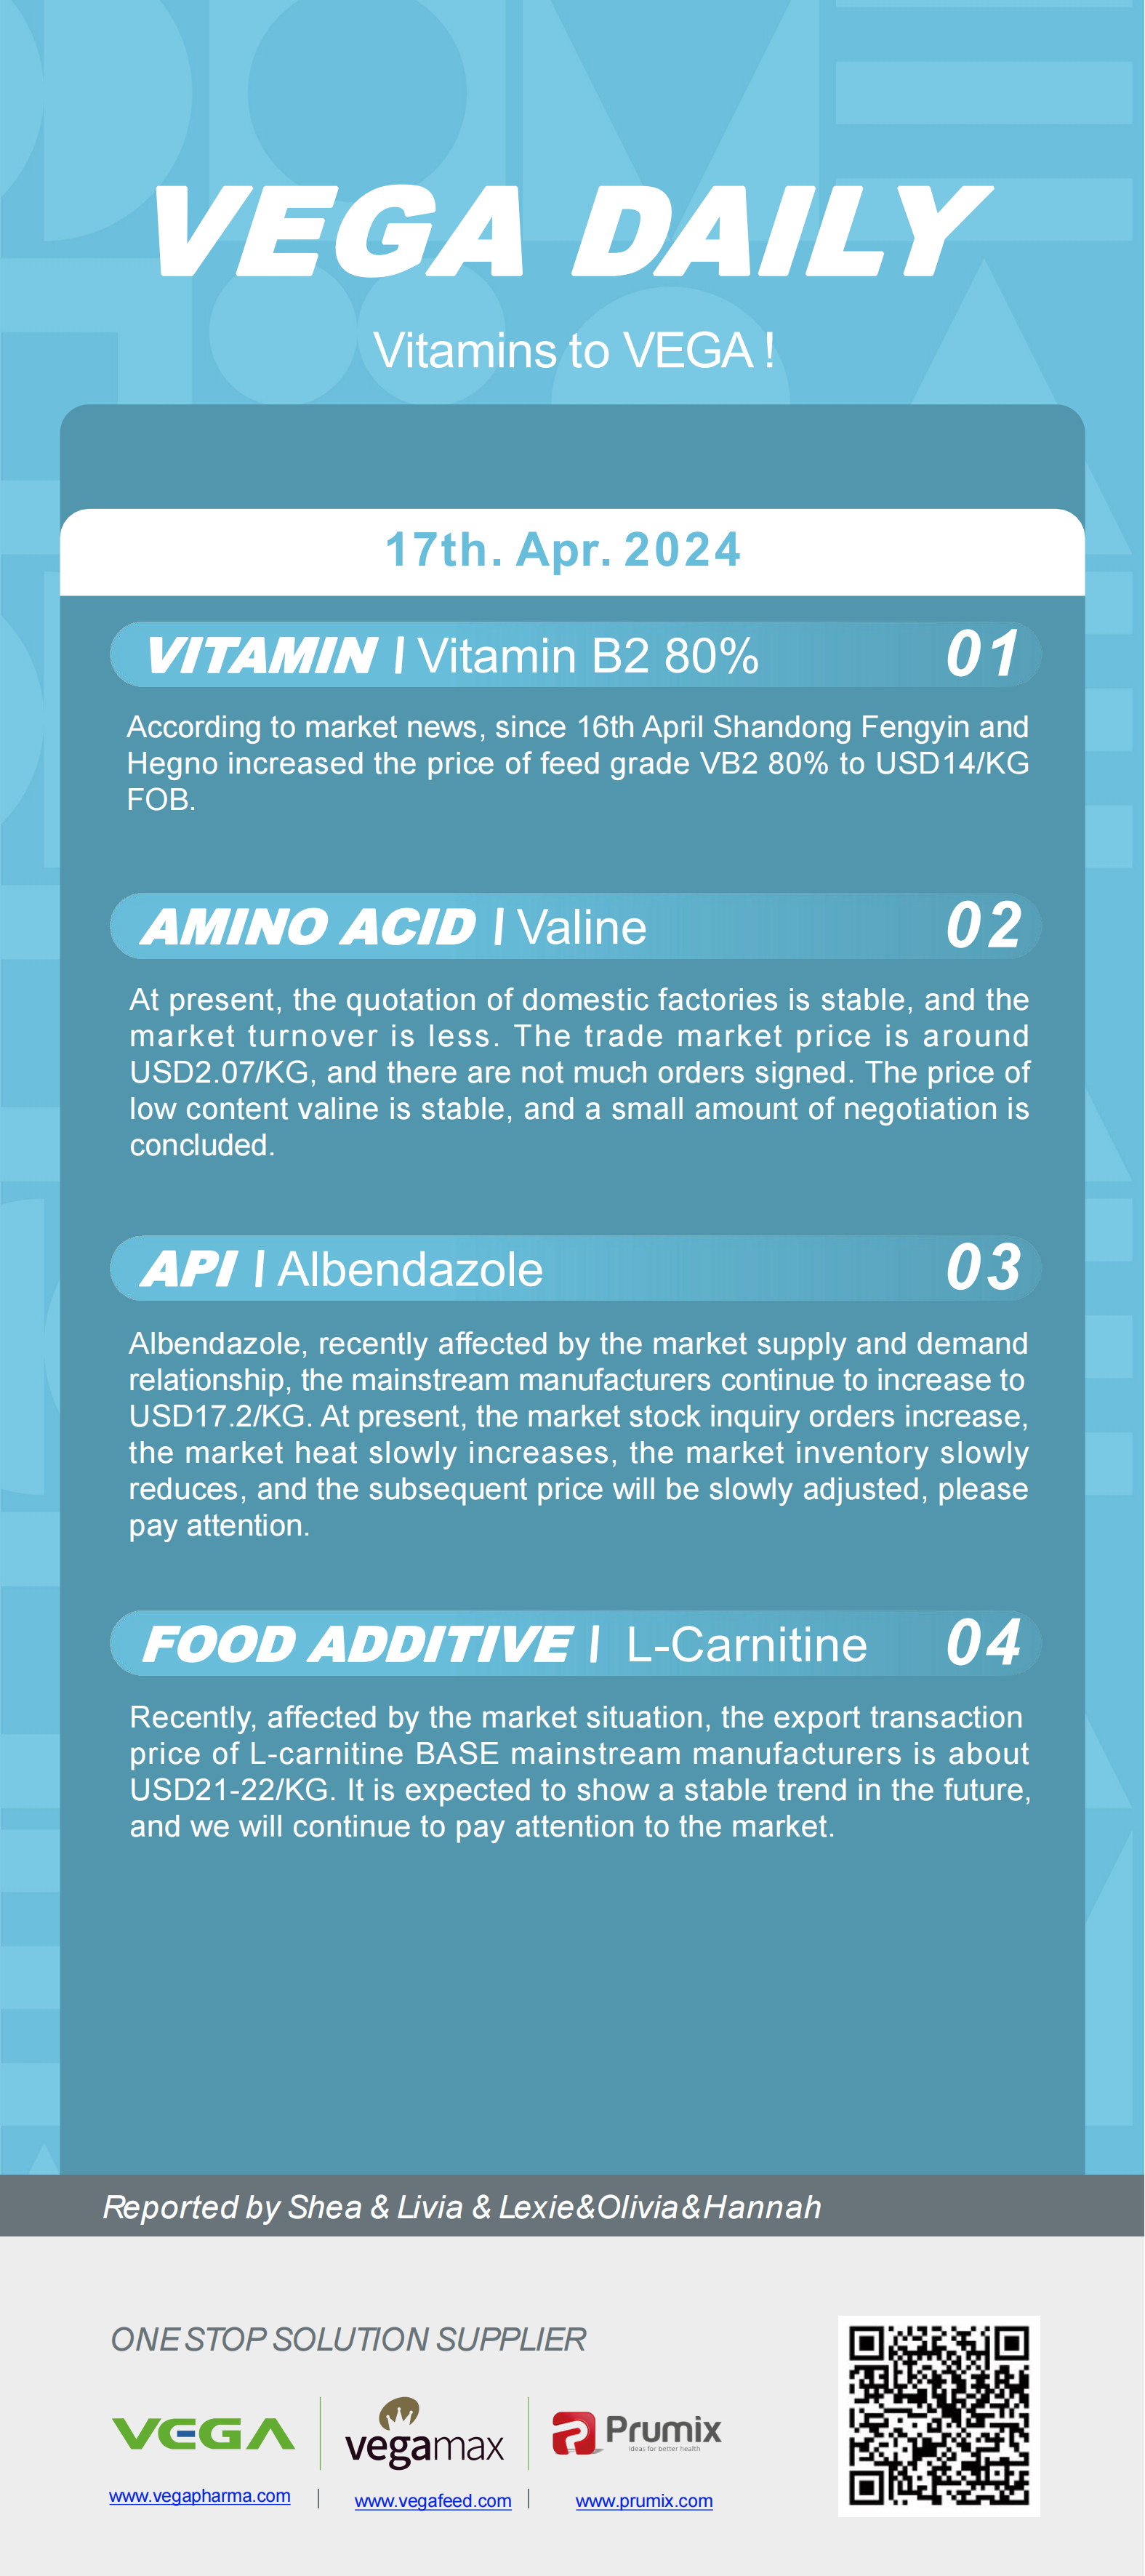 Vega Daily Dated on Apr 17th 2024 Vitamin Amino Acid APl Food Additives.png